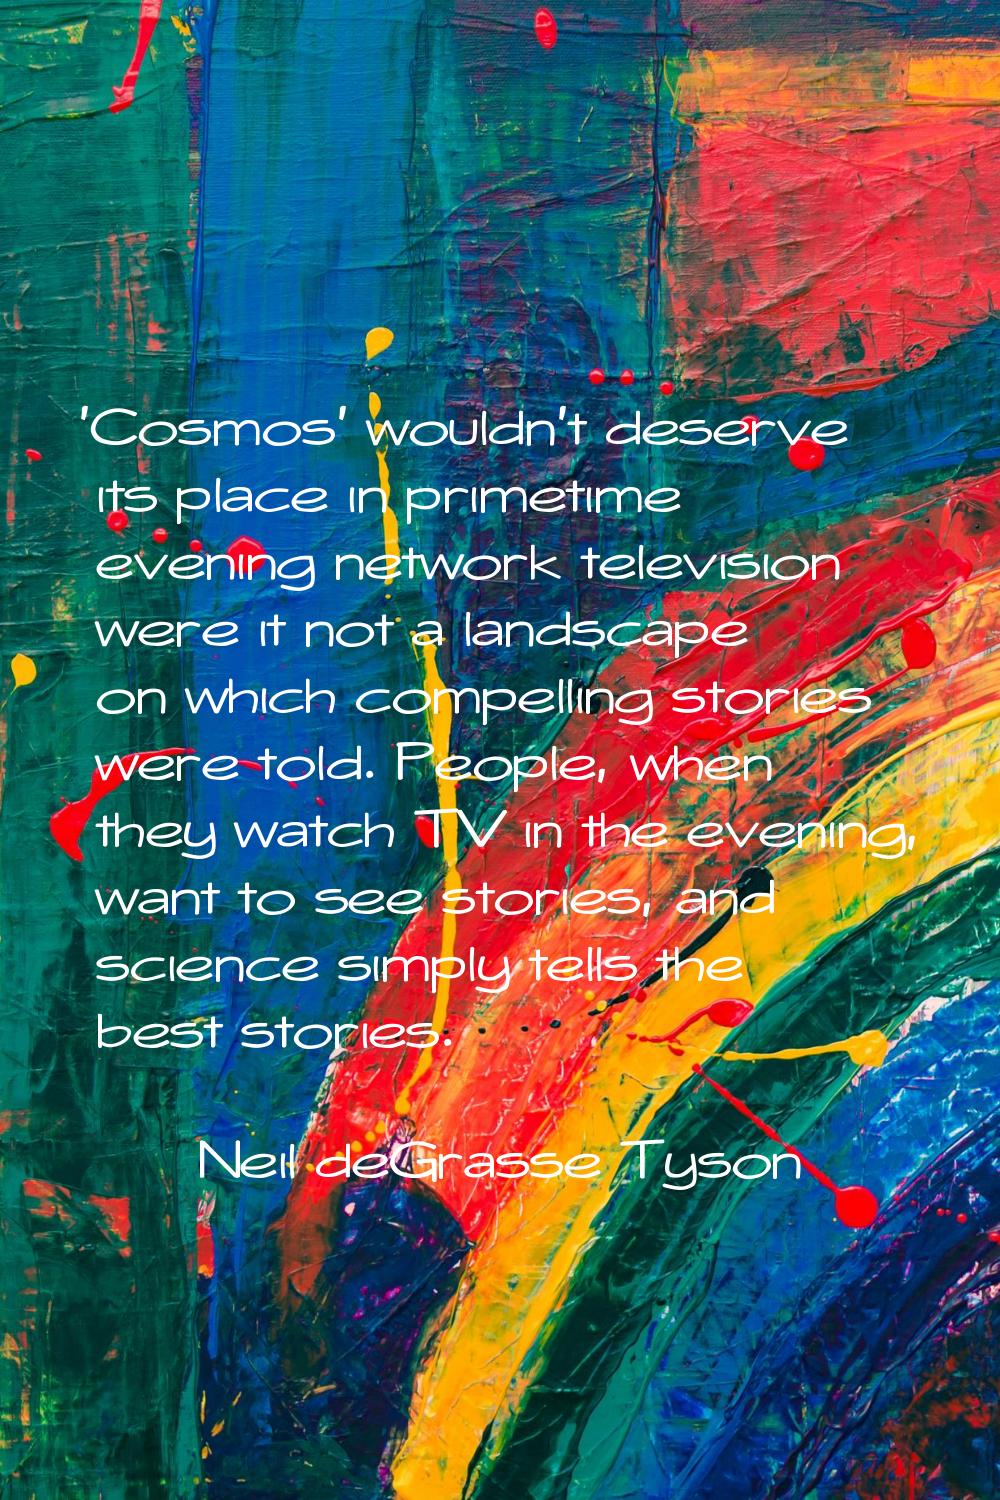 'Cosmos' wouldn't deserve its place in primetime evening network television were it not a landscape